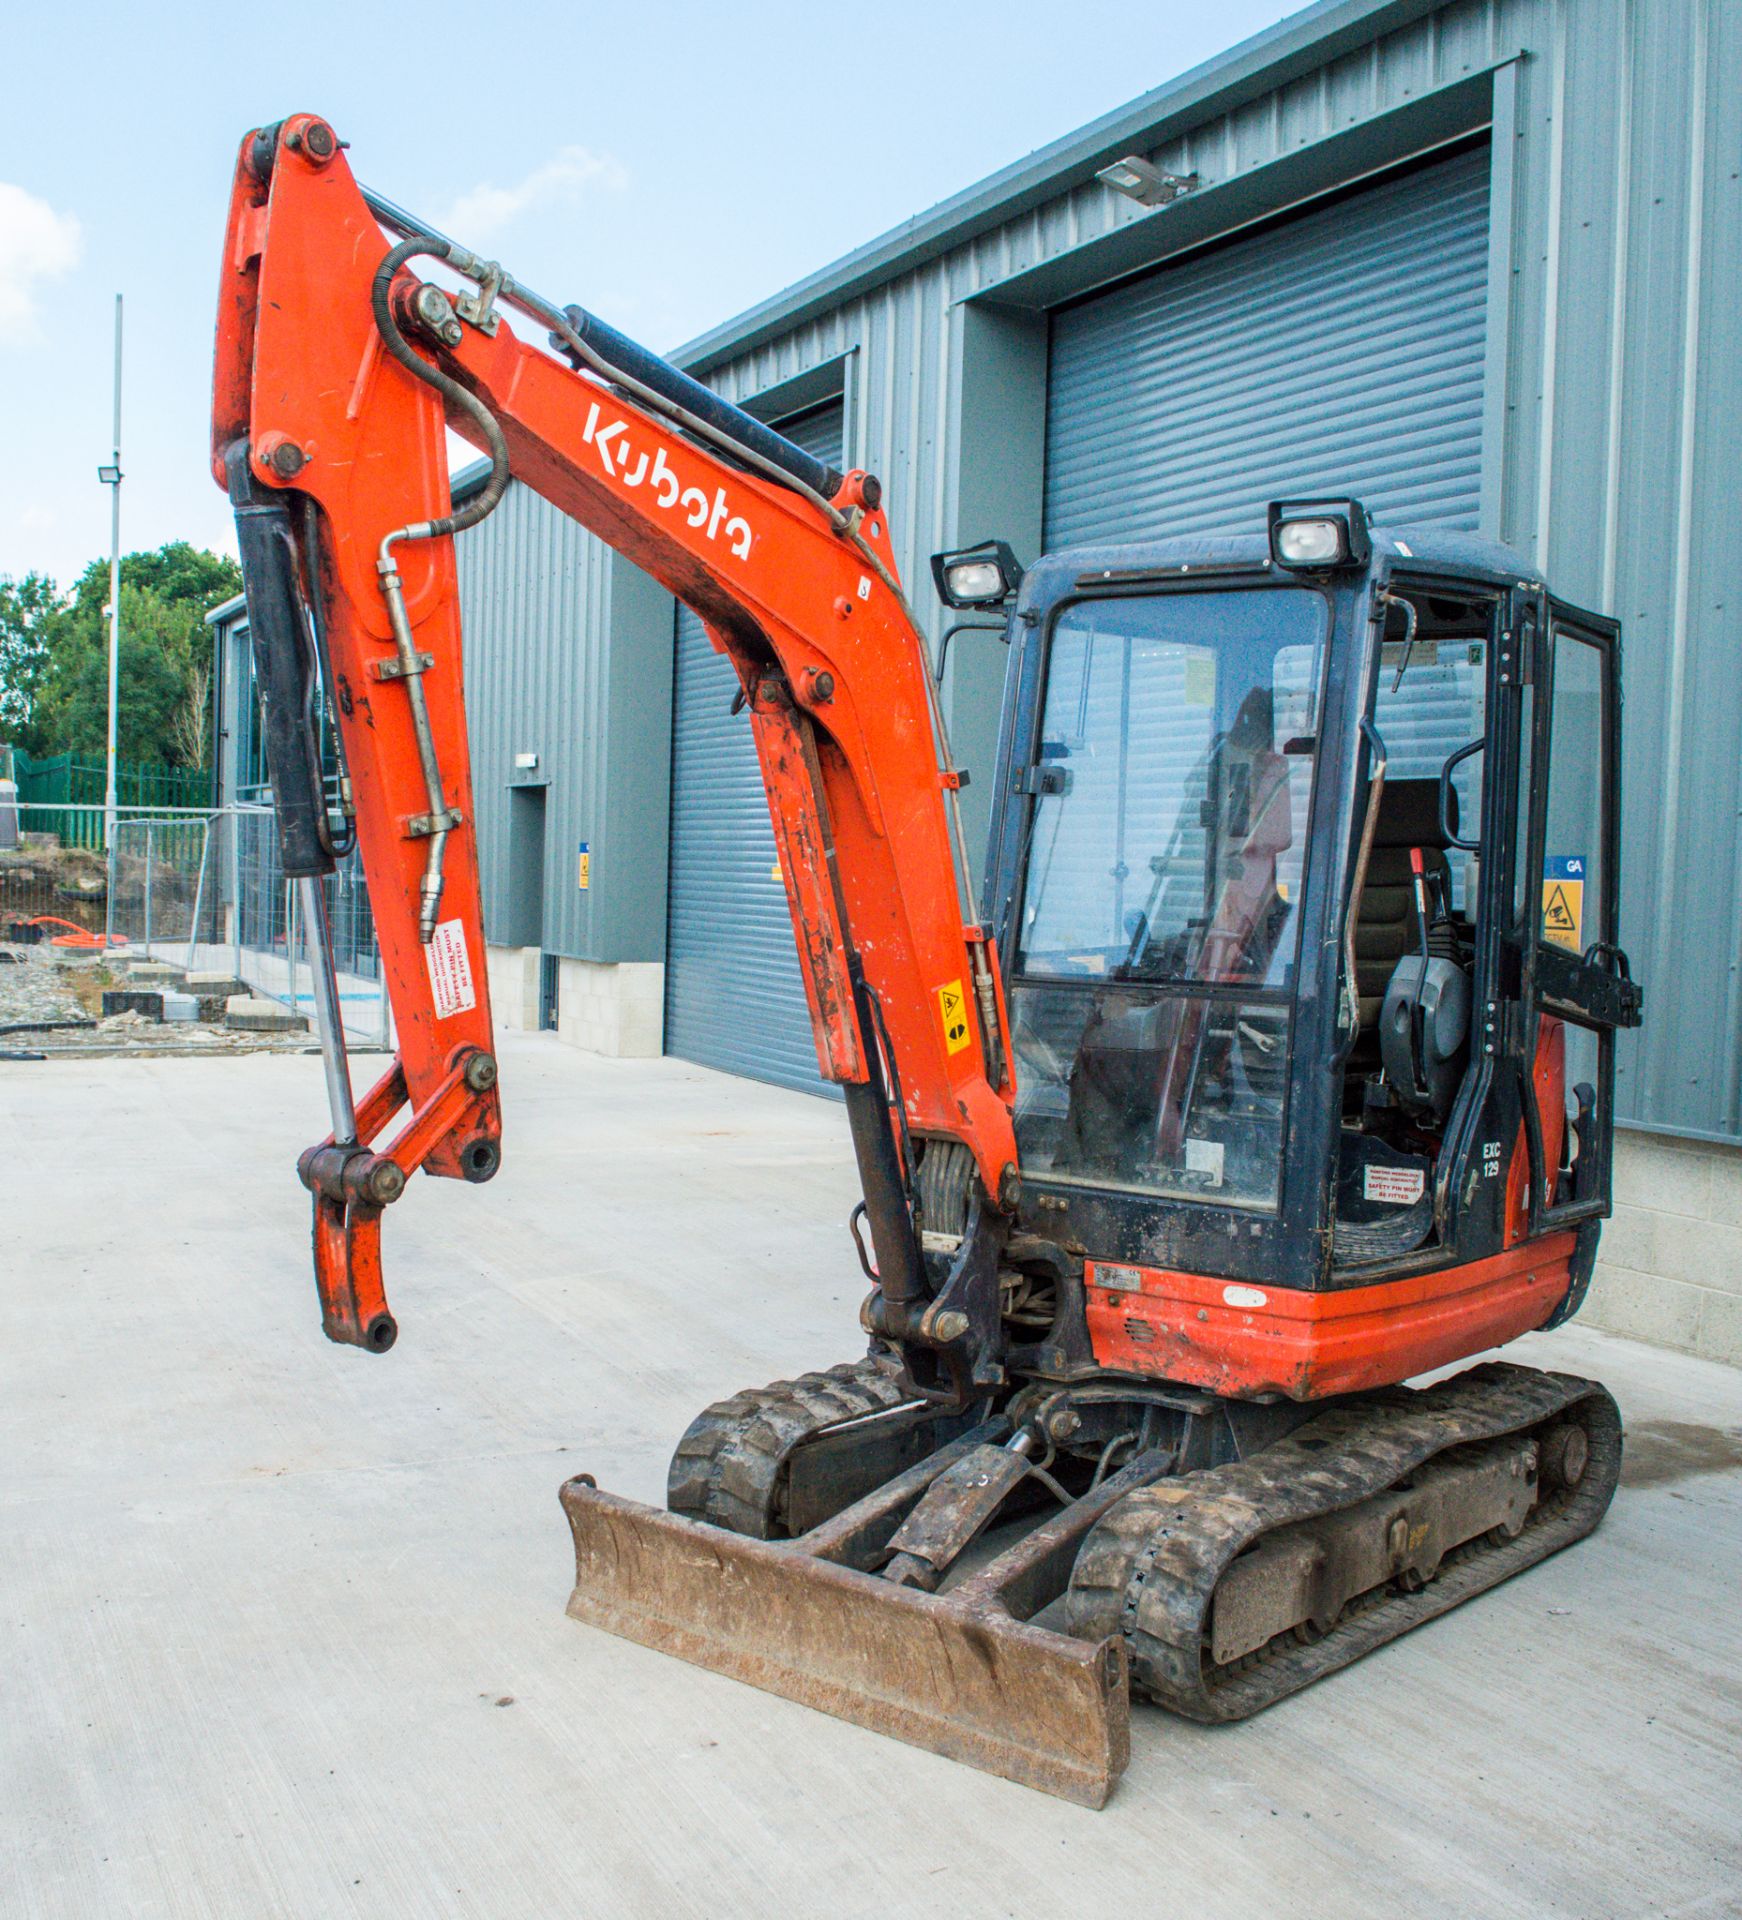 Kubota KX61-3 2.6 tonne rubber tracked excavator  Year: 2014 S/N: 80674 Recorded hours: 3355 piped &